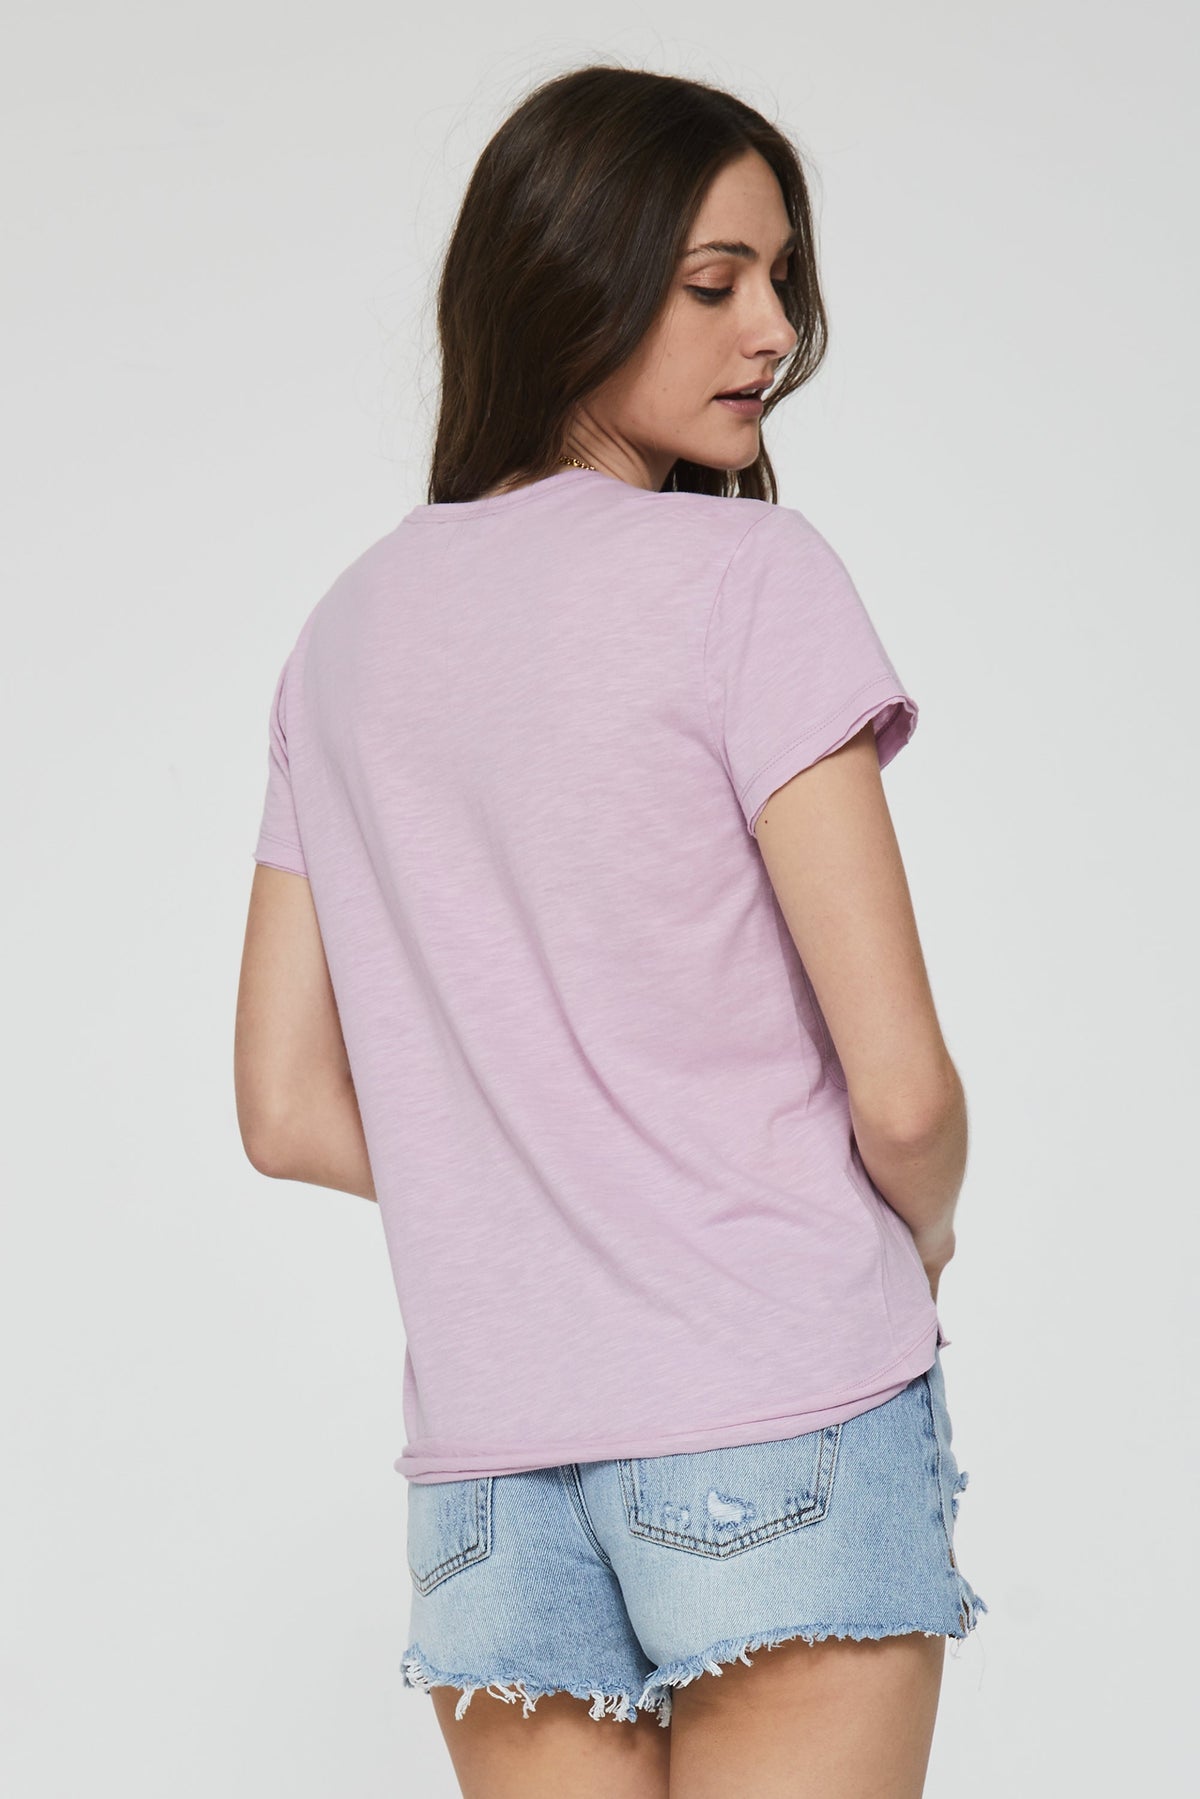 yvet-side-vent-top-verbena-back-image-another-love-clothing